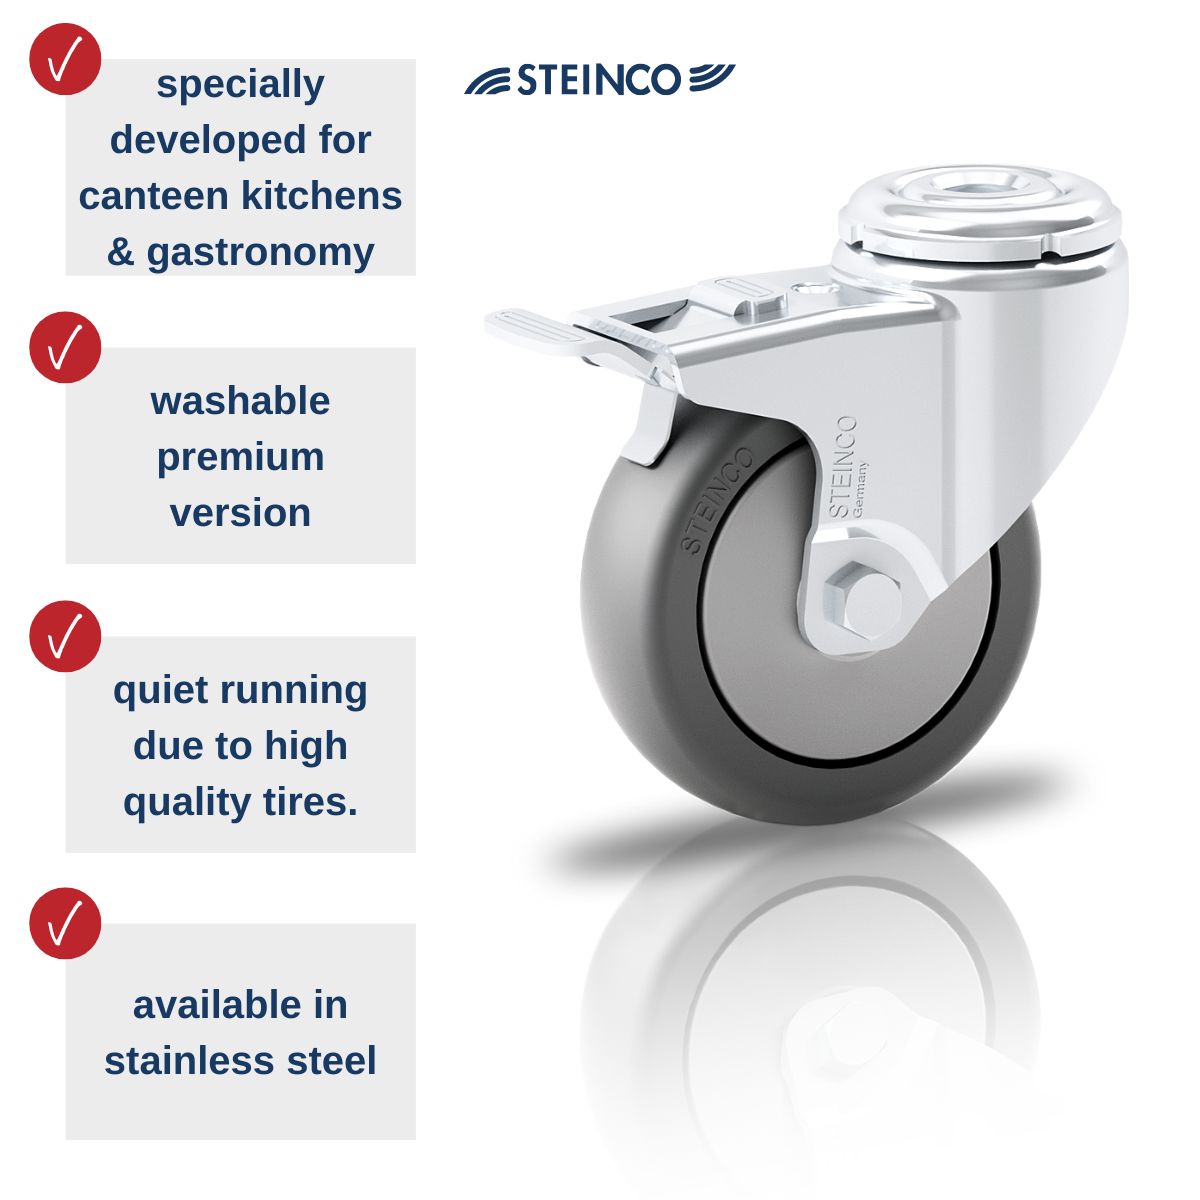 Stainless steel castors and wheels - specially developed for stainless steel trolleys in Commercial Kitchens, catering kitchens, canteens and the food industry.